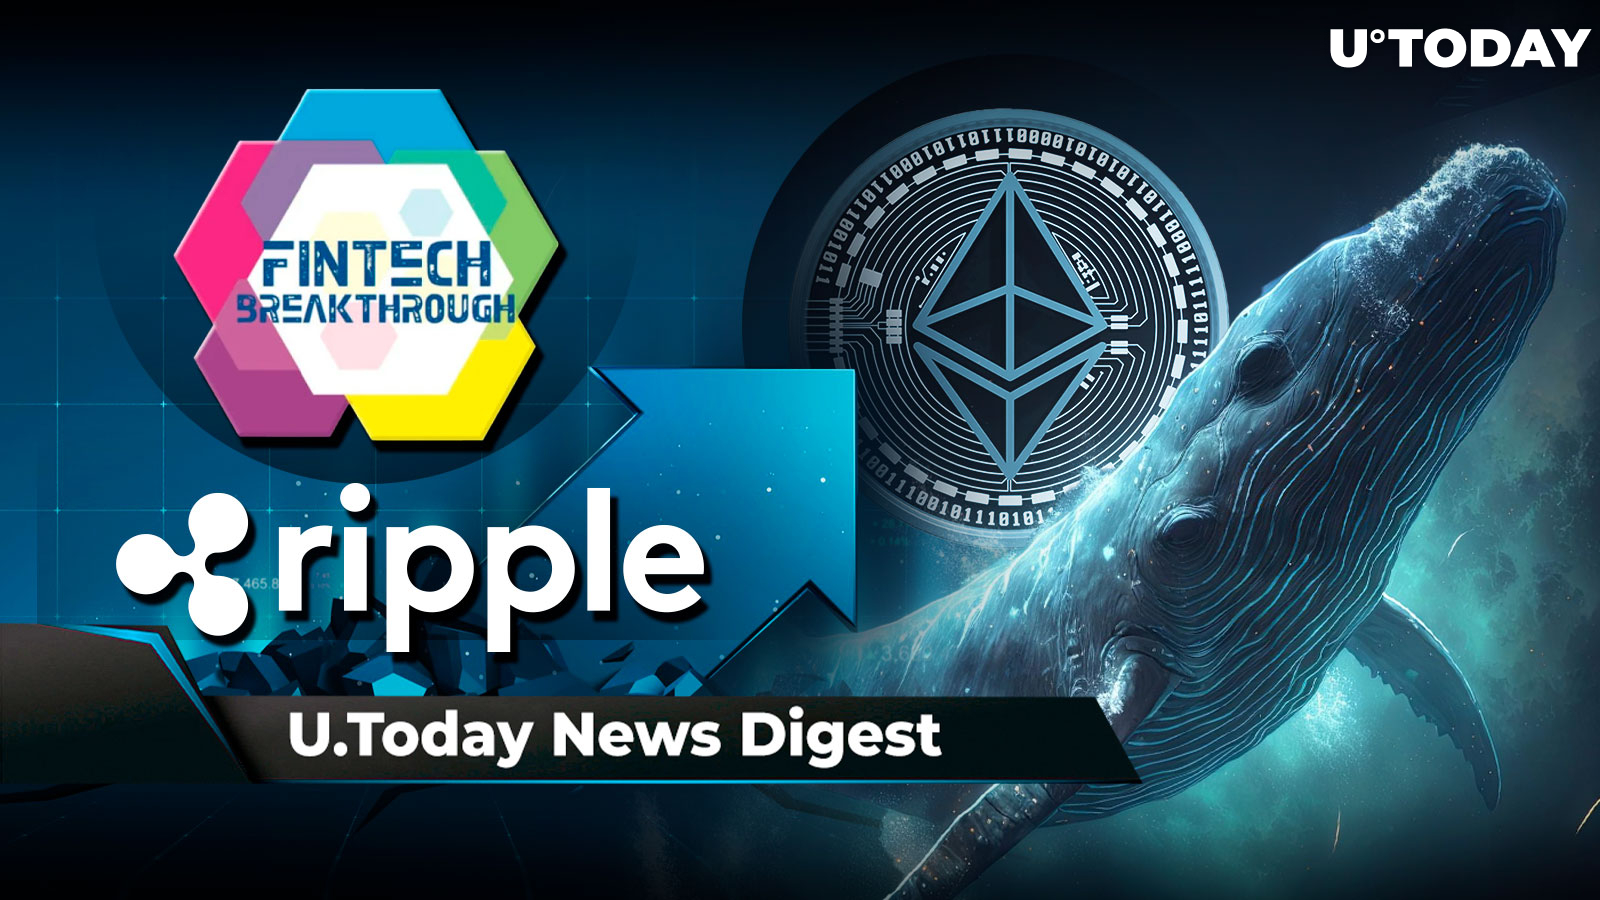 Ripple Labs Wins Rare Award in Payments Technology, Ethereum Whales Cash out As ETH Price Drops, XRP Triggers 125% Volume Surge Amid Market Crash: Crypto News Digest by U.Today